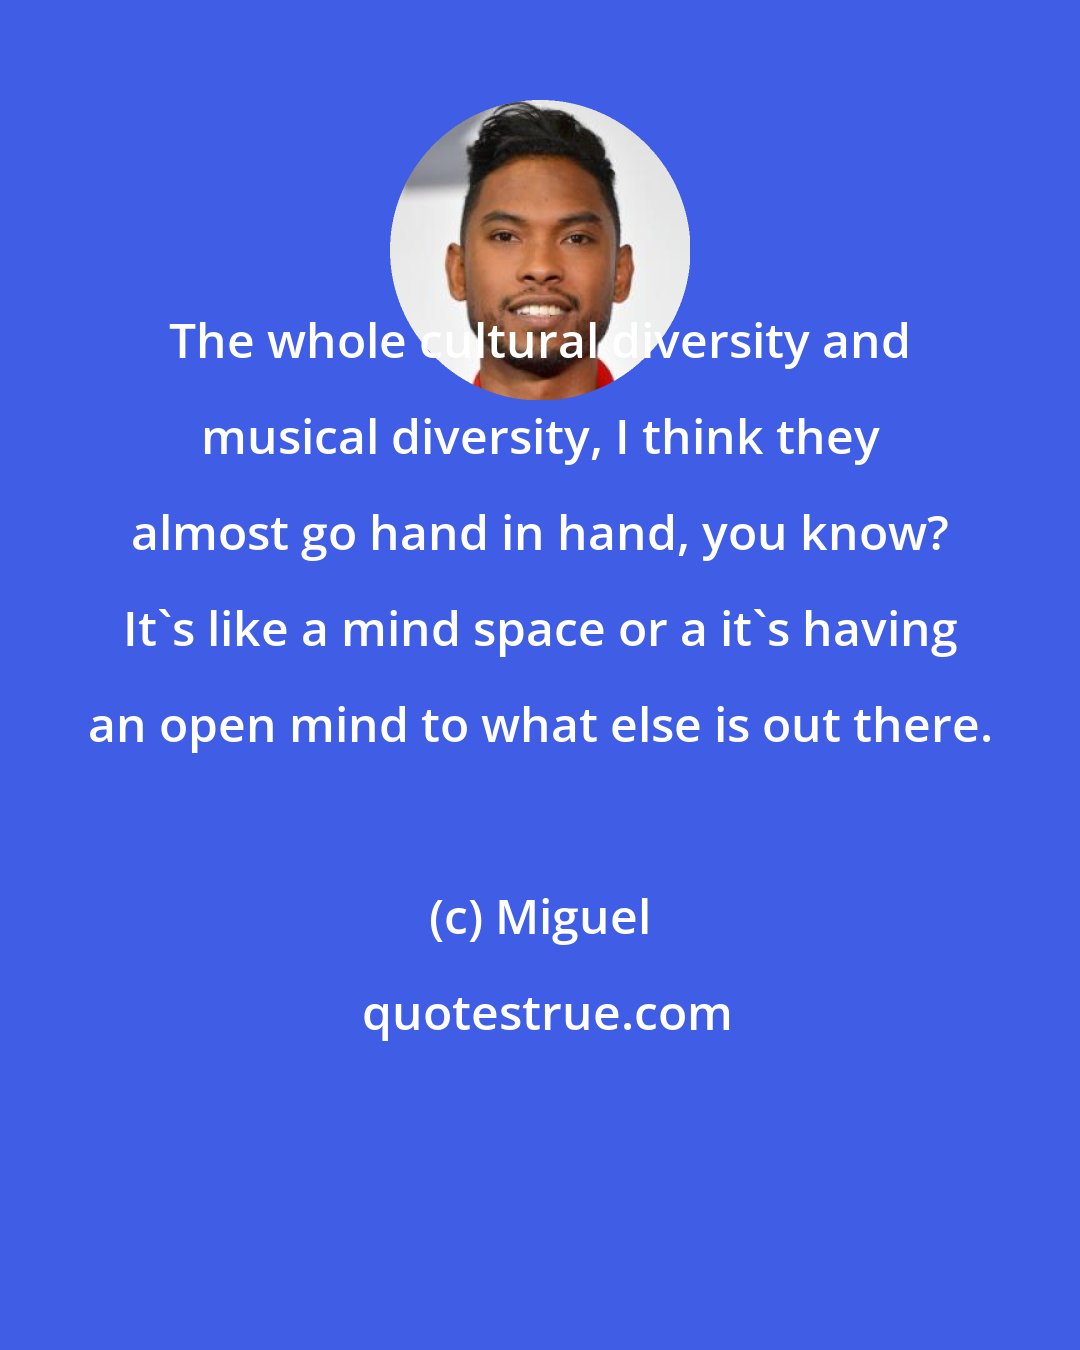 Miguel: The whole cultural diversity and musical diversity, I think they almost go hand in hand, you know? It's like a mind space or a it's having an open mind to what else is out there.